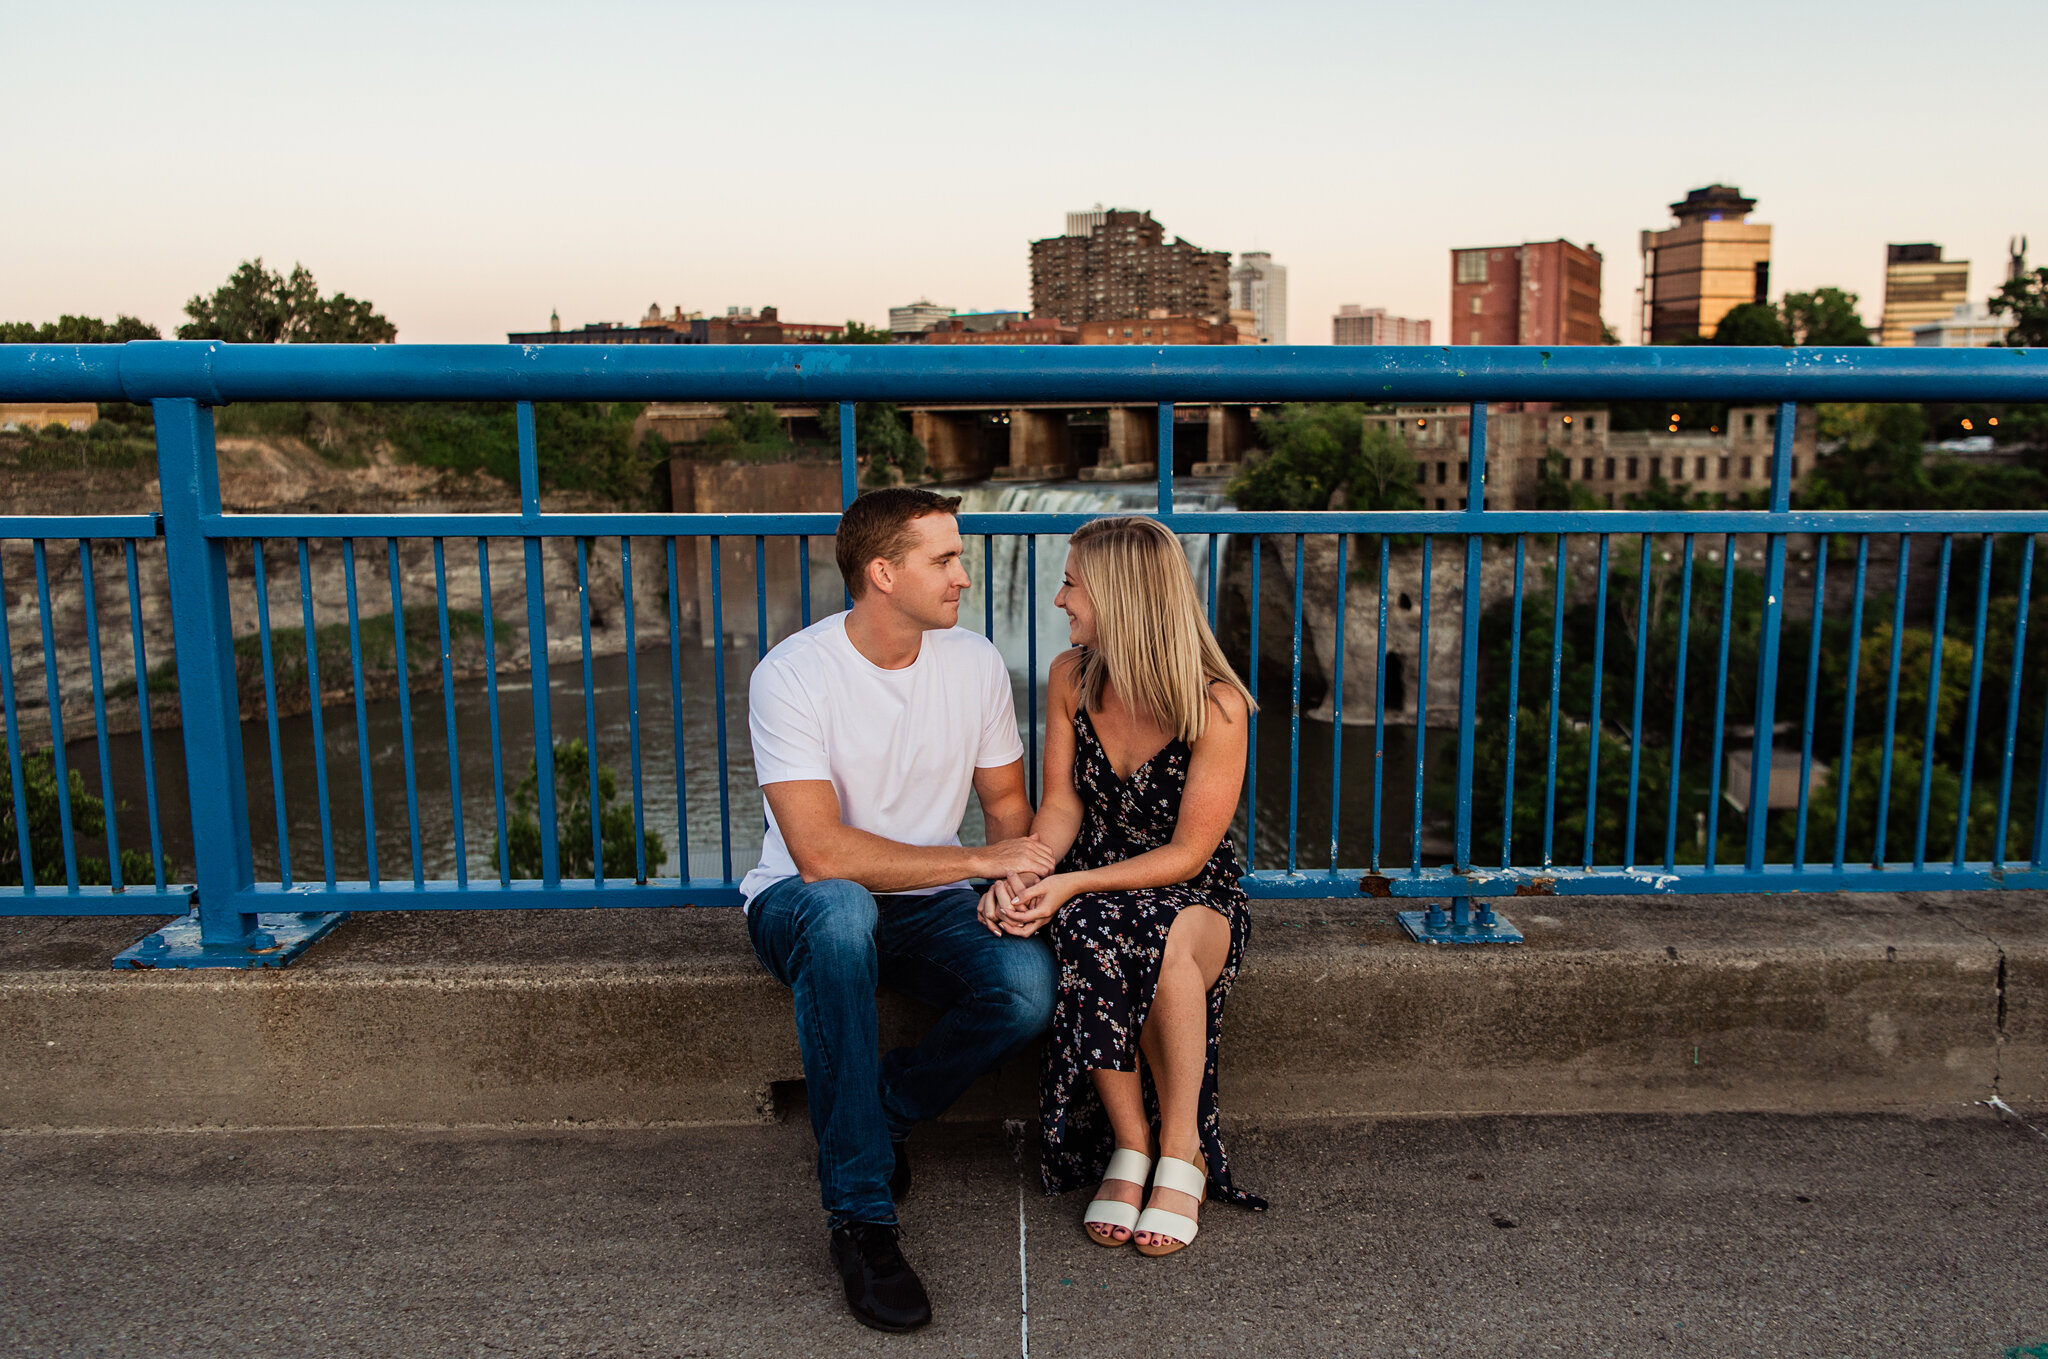 Genesee_Brew_House_High_Falls_Rochester_Engagement_Session_JILL_STUDIO_Rochester_NY_Photographer_5913.jpg